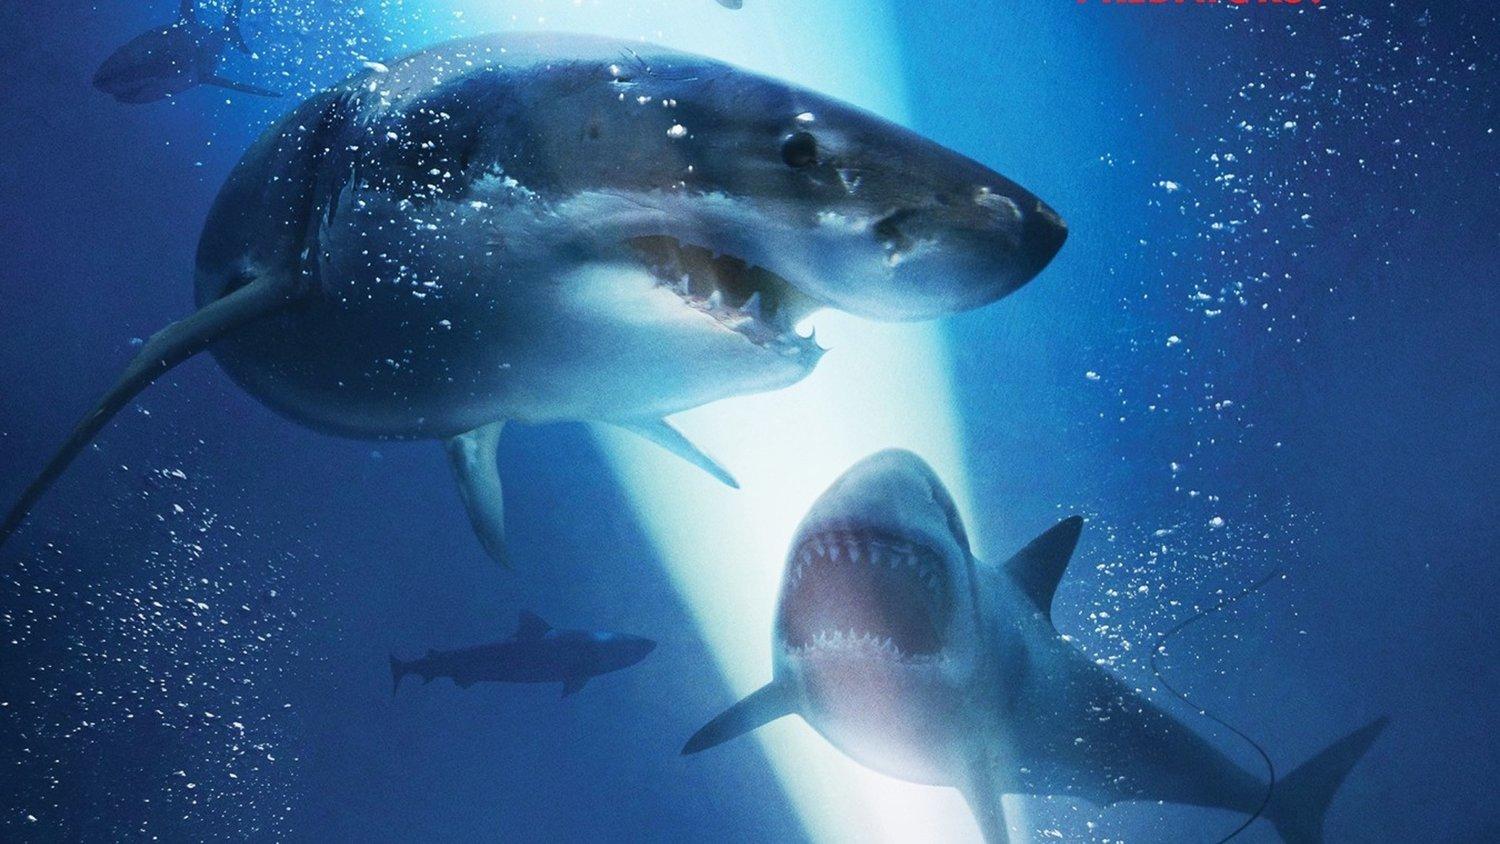 New for the Claustrophobic Shark Attack Thriller 47 METERS